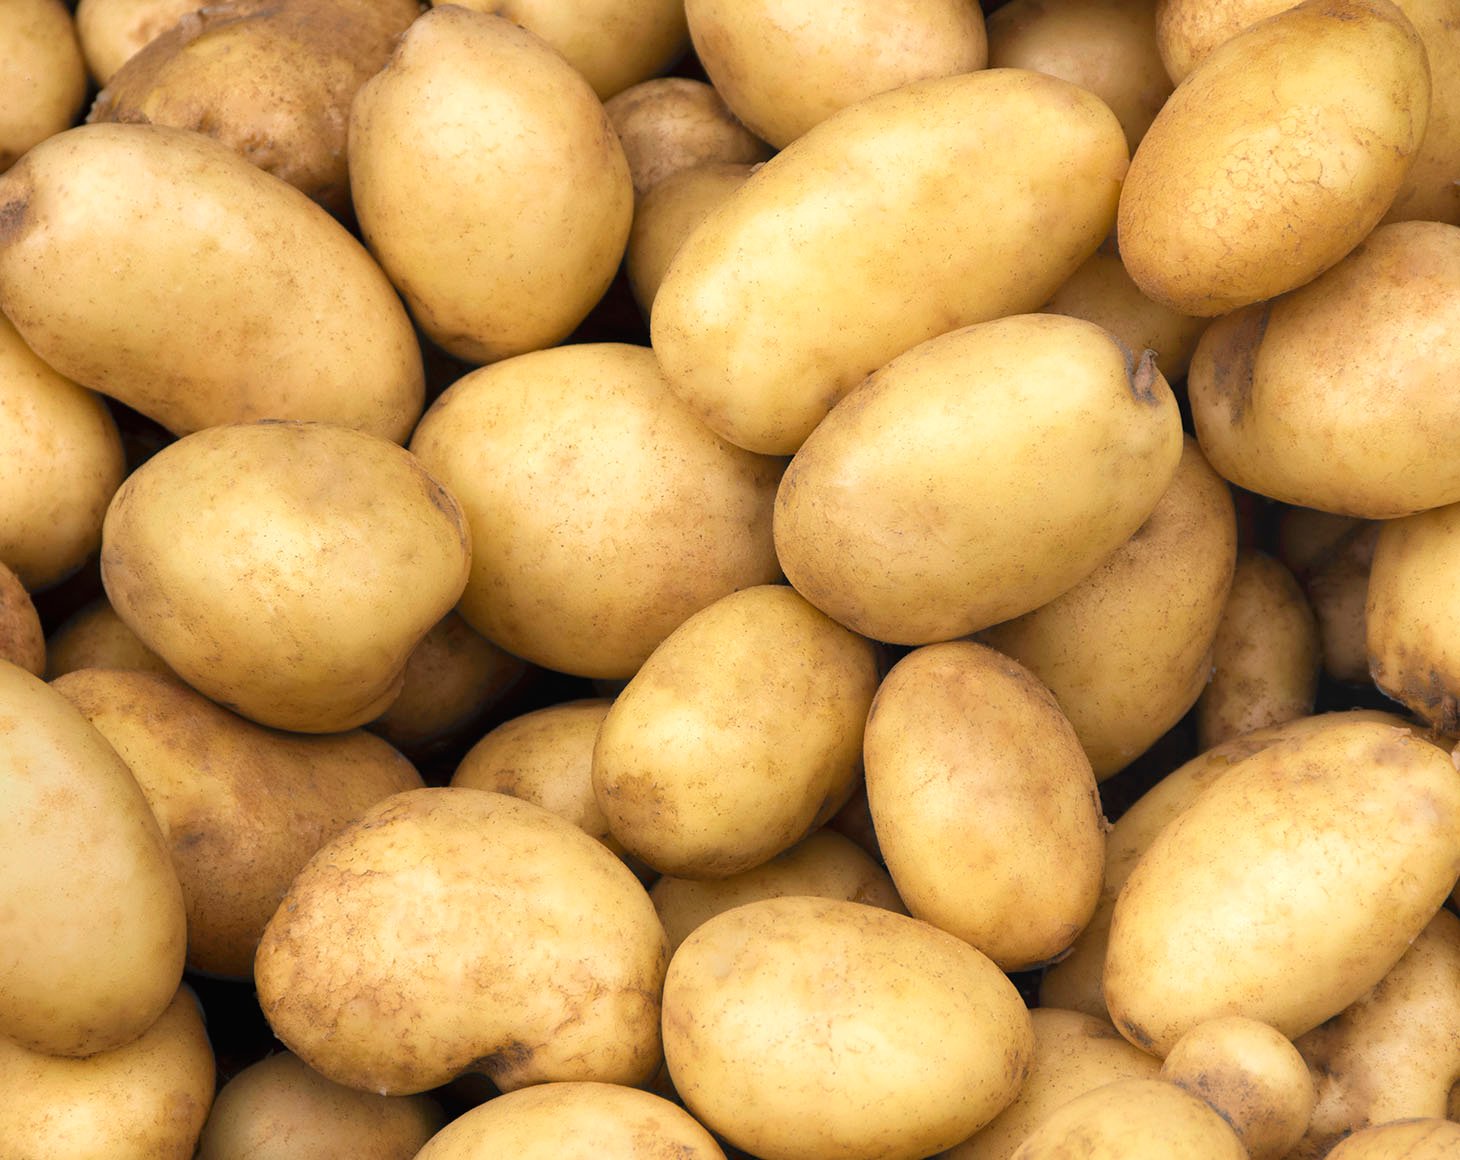 Pile of fresh potatoes on sale in vegetable stand display at sup